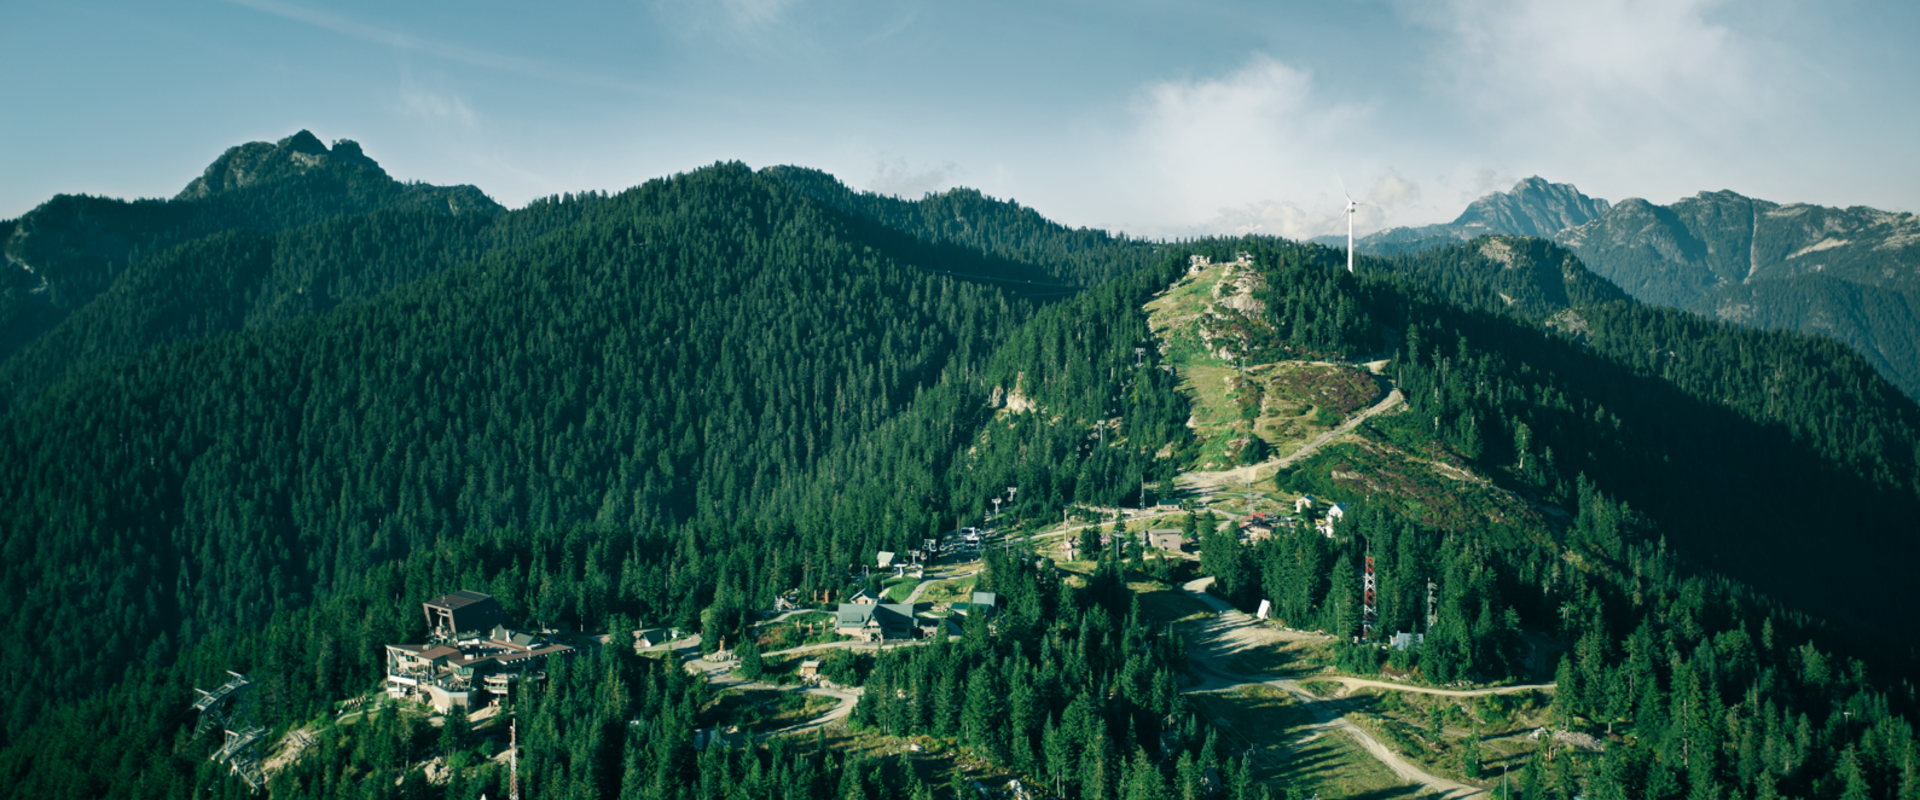 Grouse Mountain Resort Sale Finalized | Grouse Mountain - The Peak of